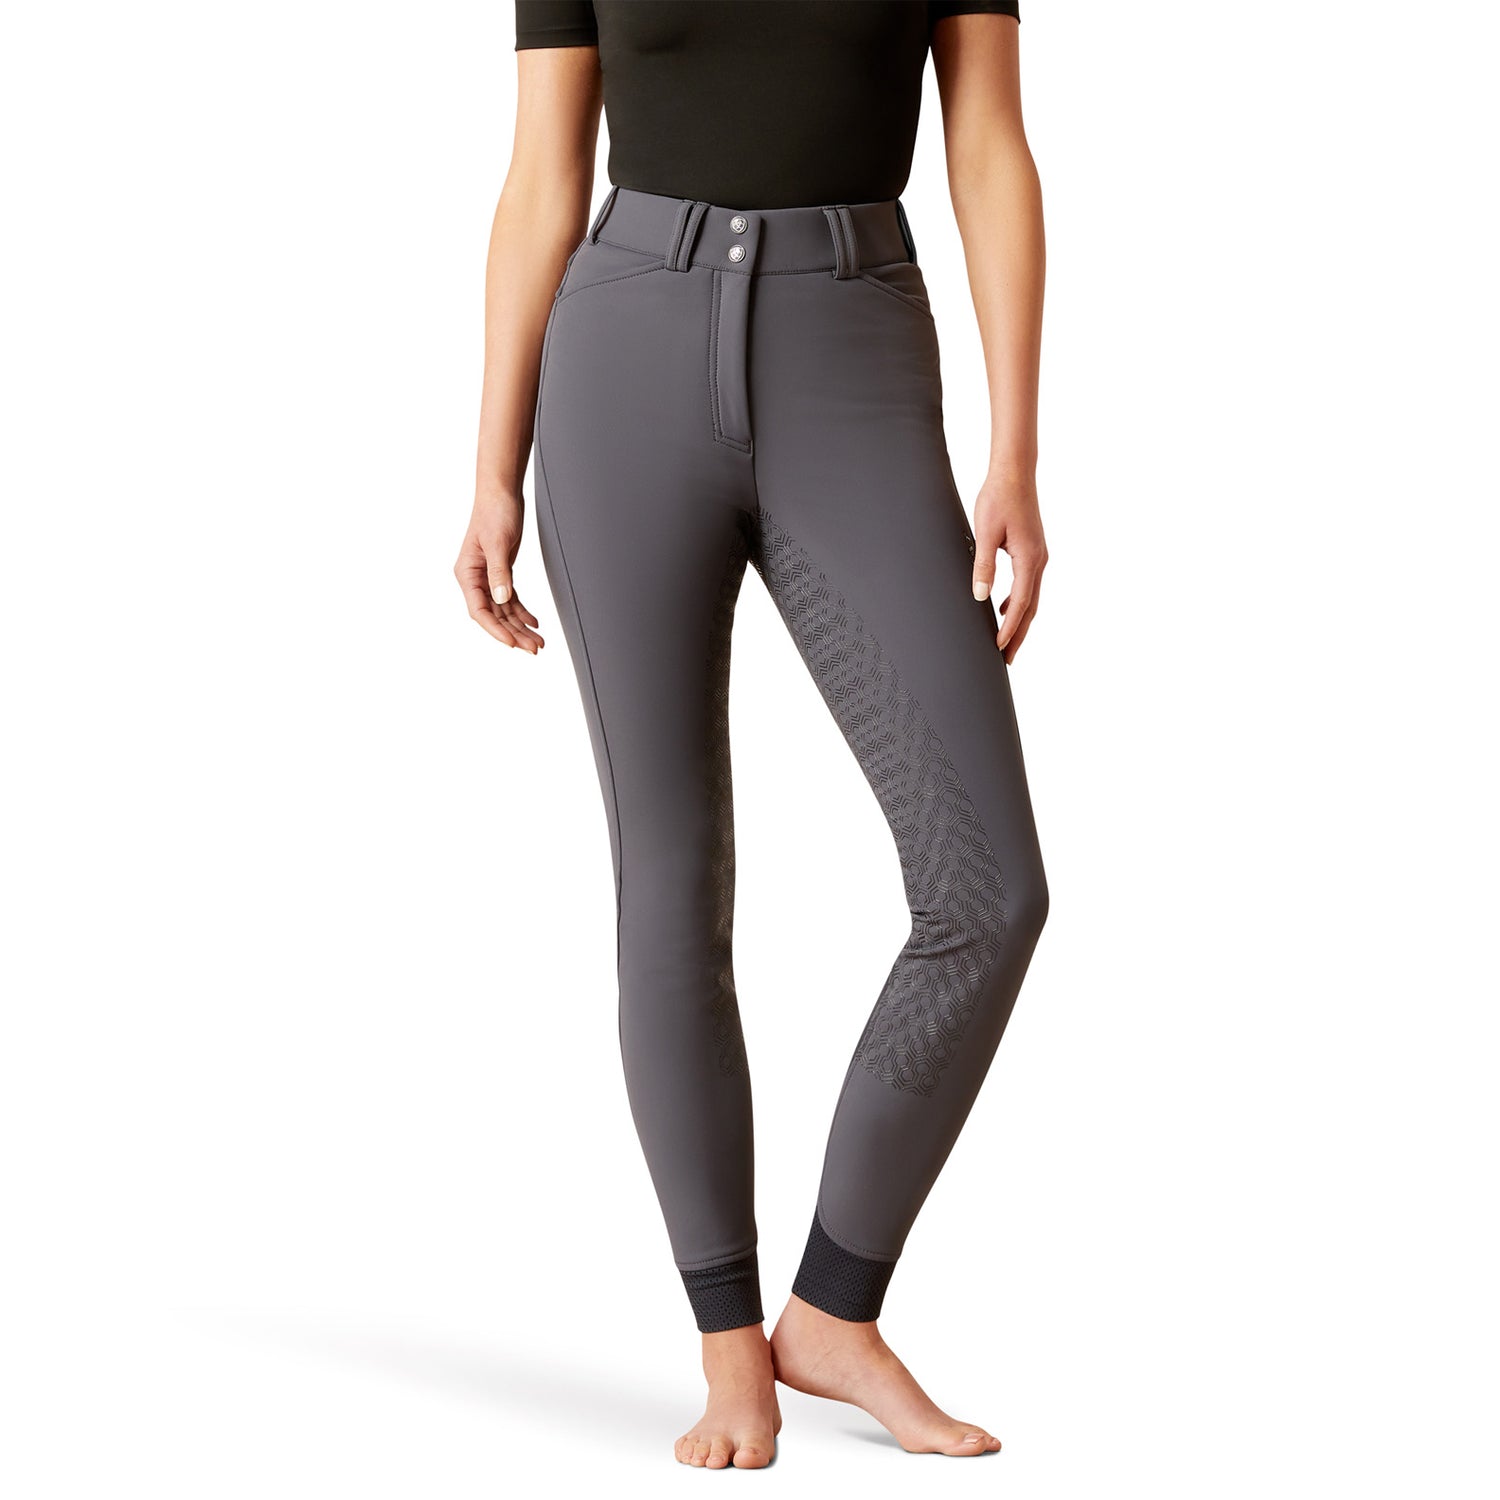 Full-Seat Breeches, Riding Breeches, Pants, & Tights